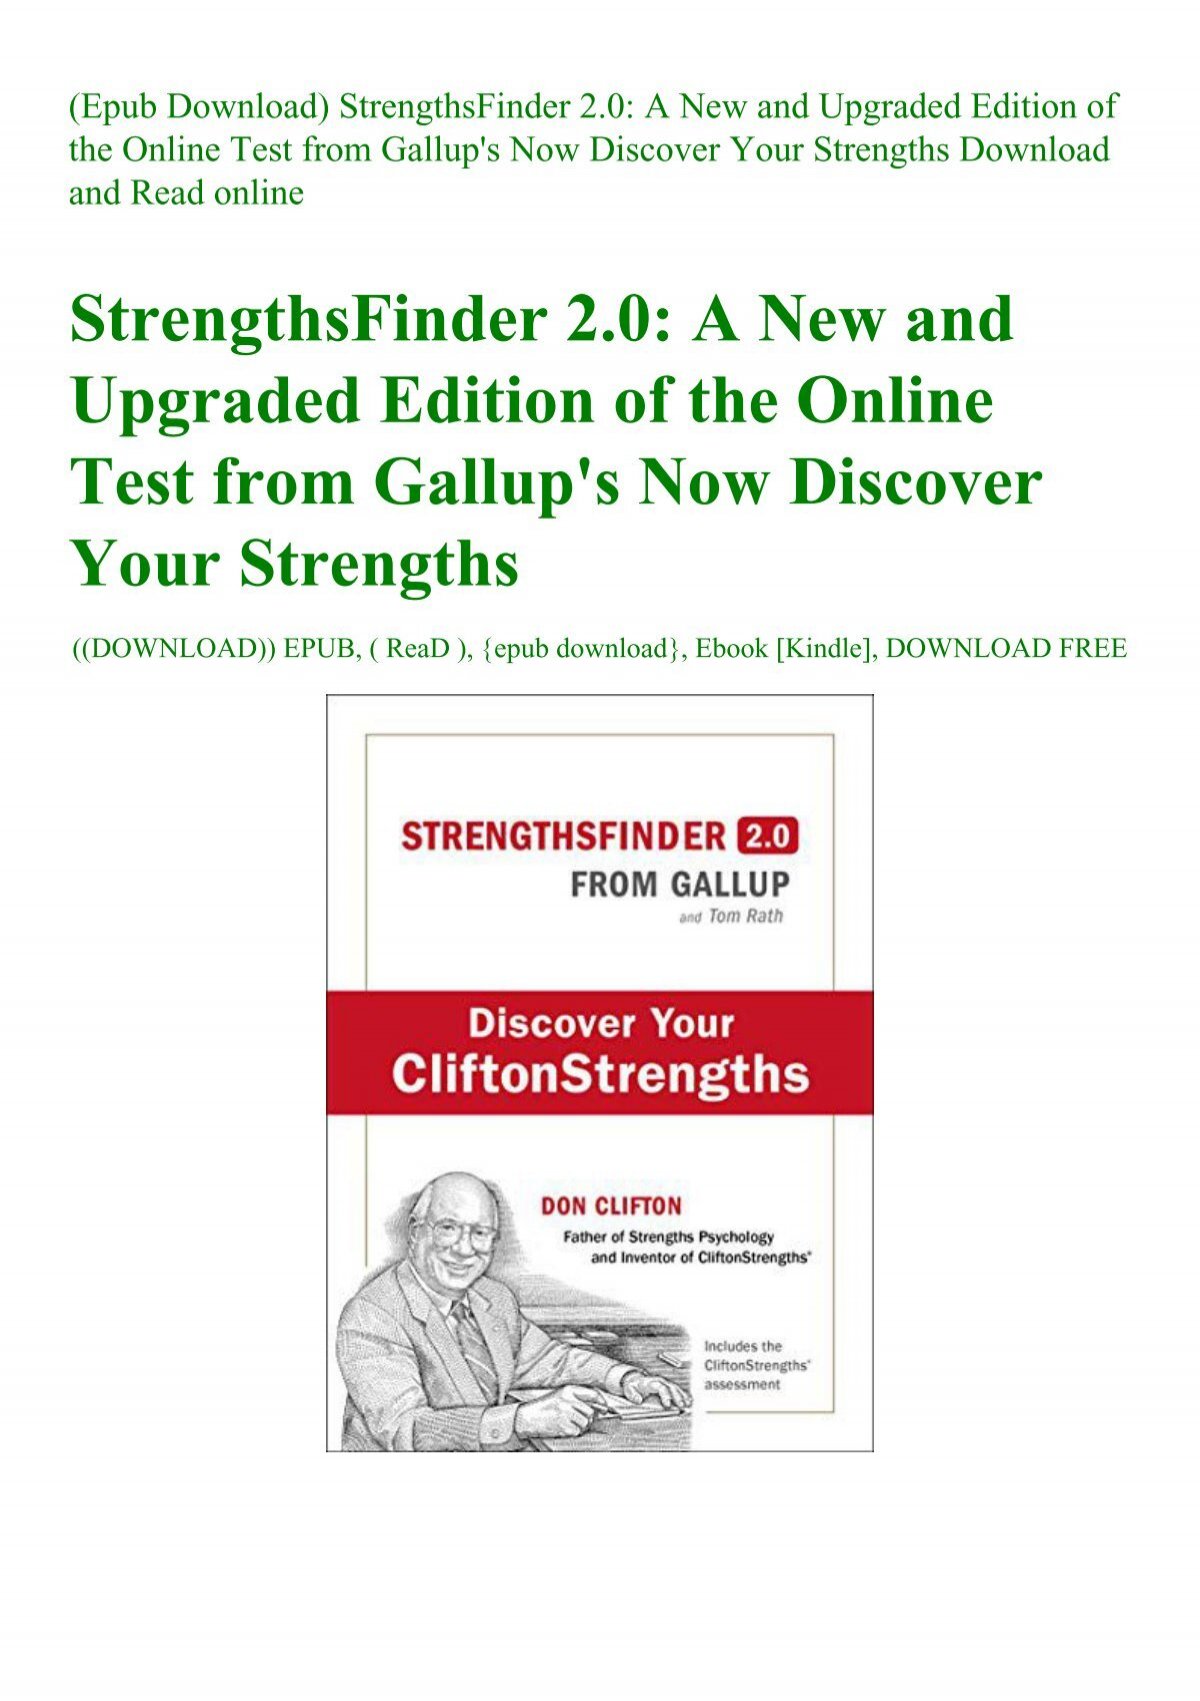 How to get a strengthsfinder 2.0 access code